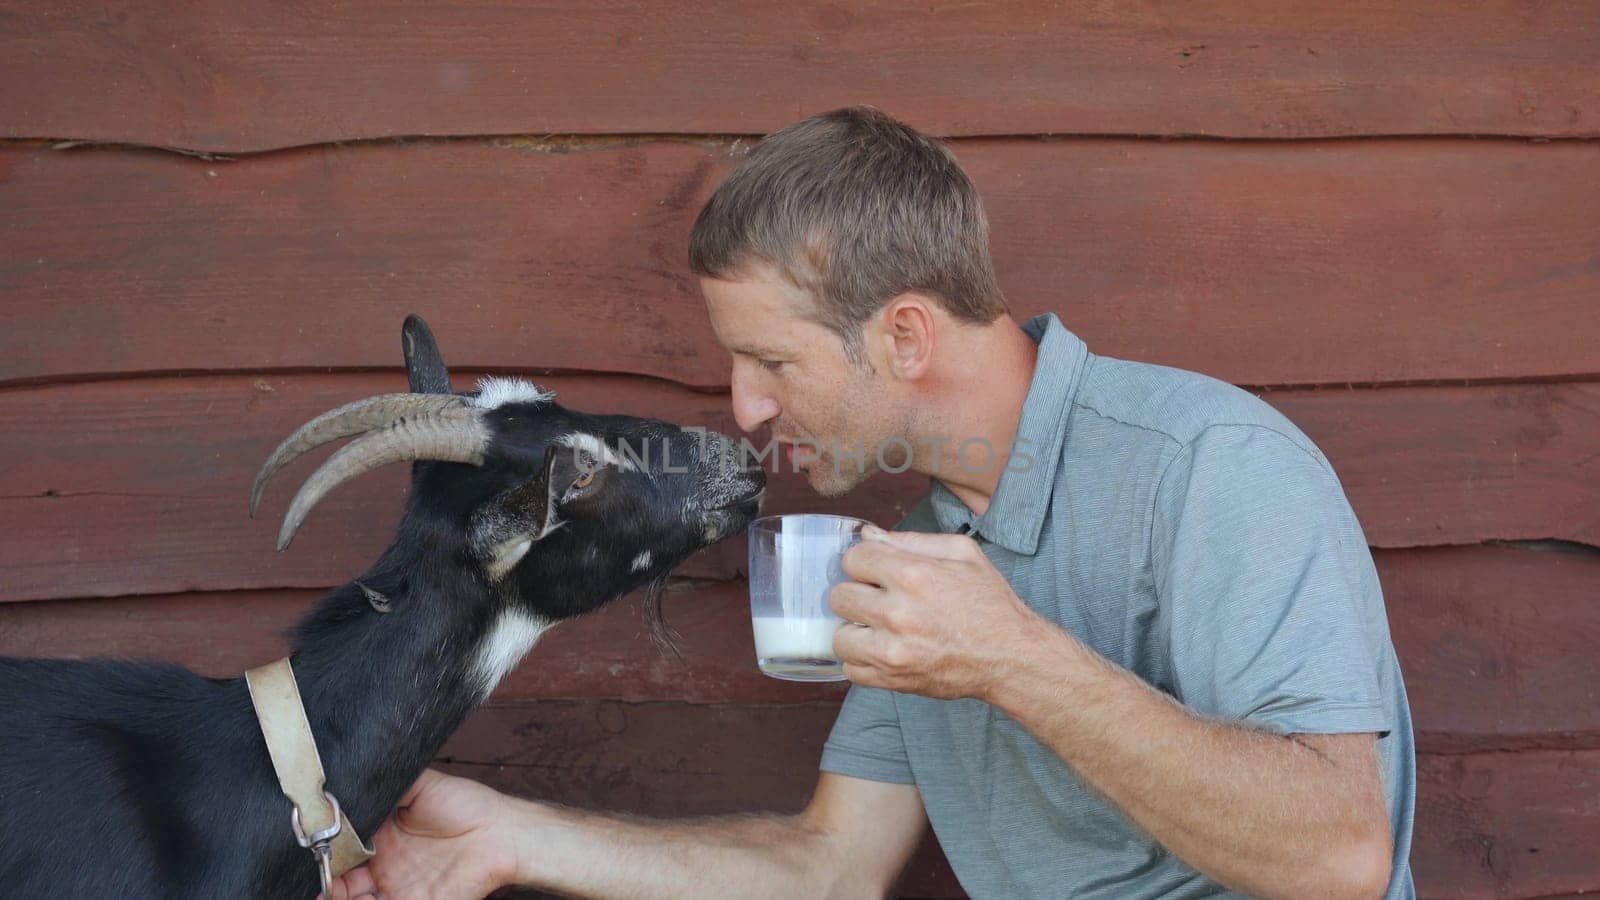 The farmer drinks goat milk from a mug and kisses his beloved goat